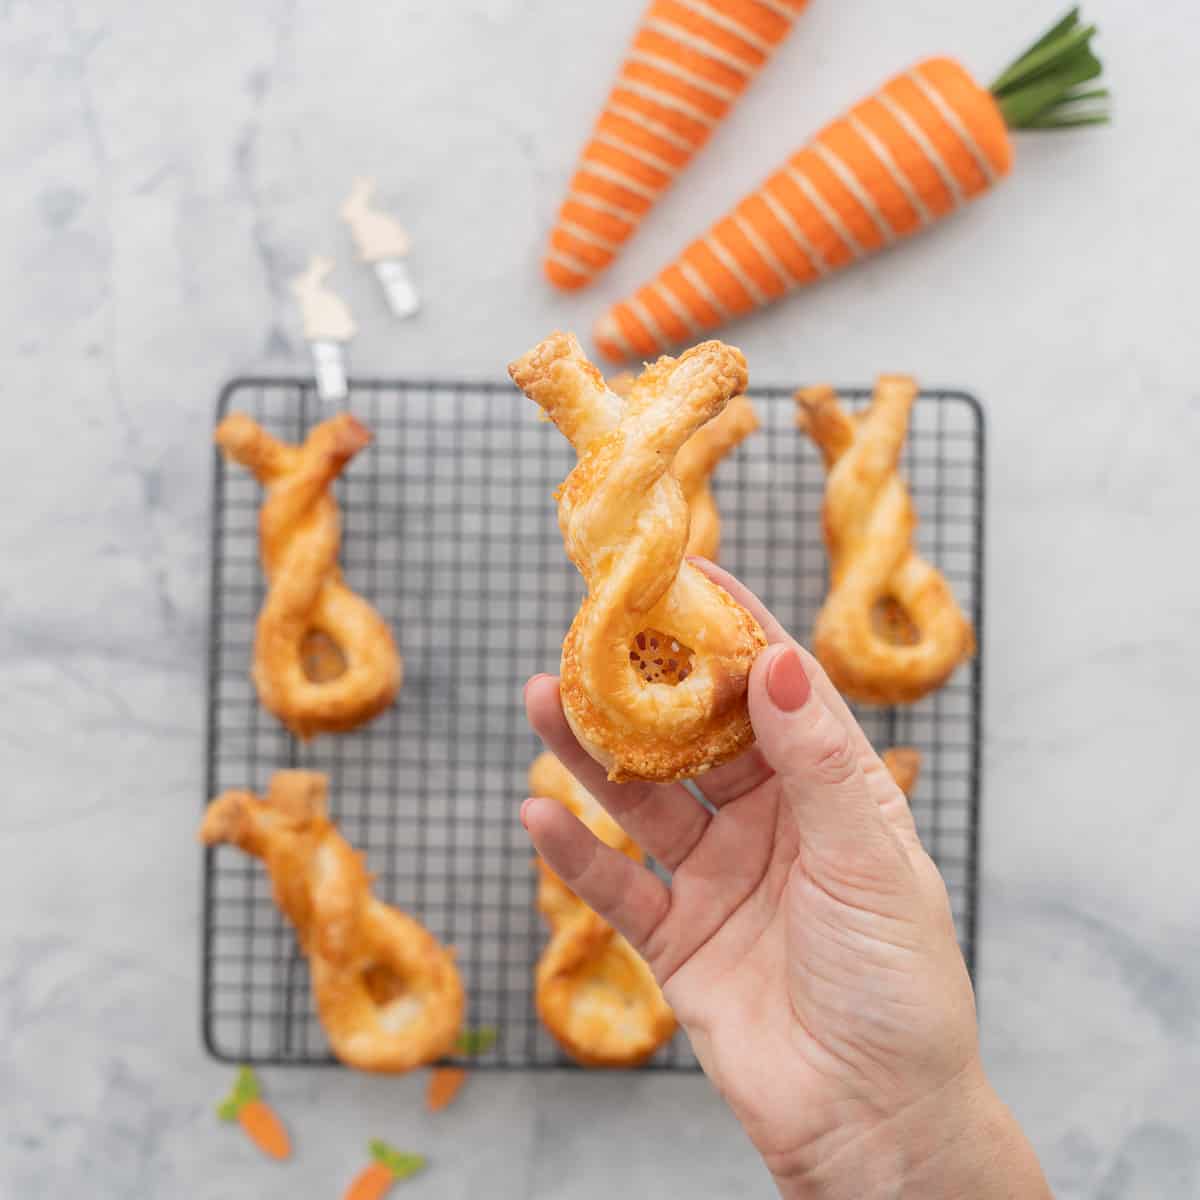 A puff pastry cheese straw twisted into the shape of a bunny being held up to the camera.